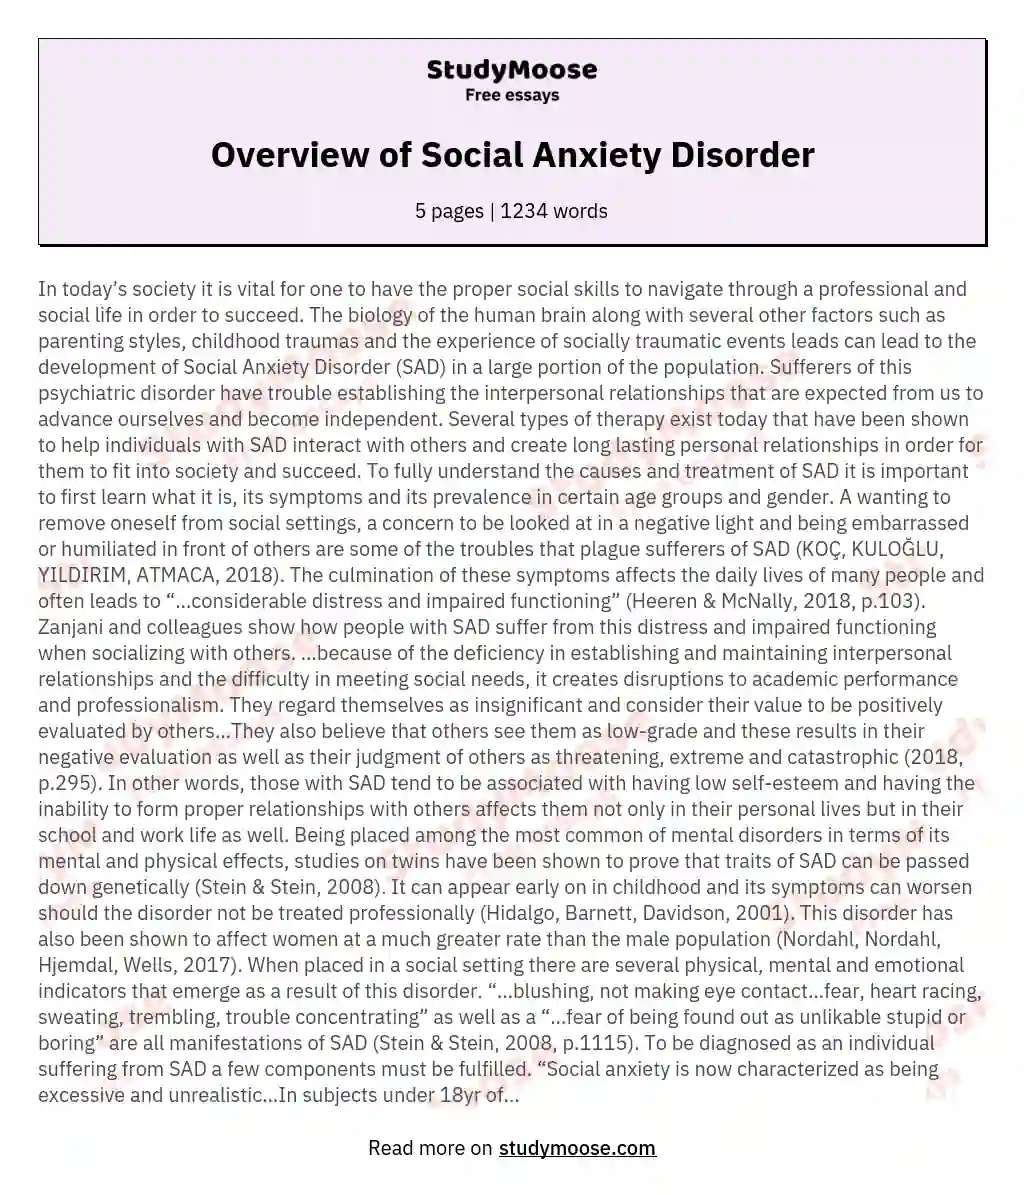 Overview of Social Anxiety Disorder essay